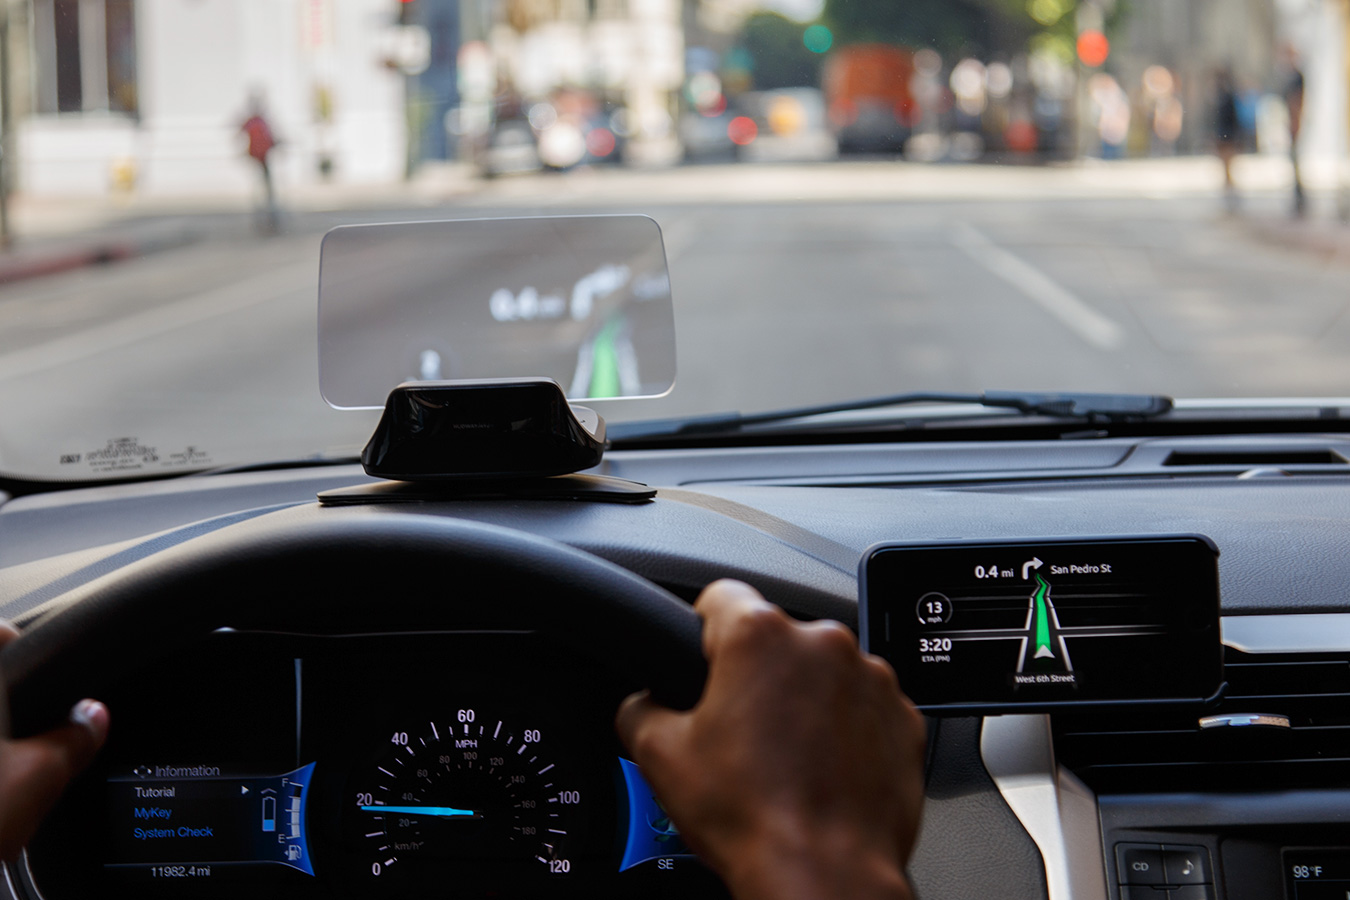 This heads-up display for your car comes equipped with 's Alexa